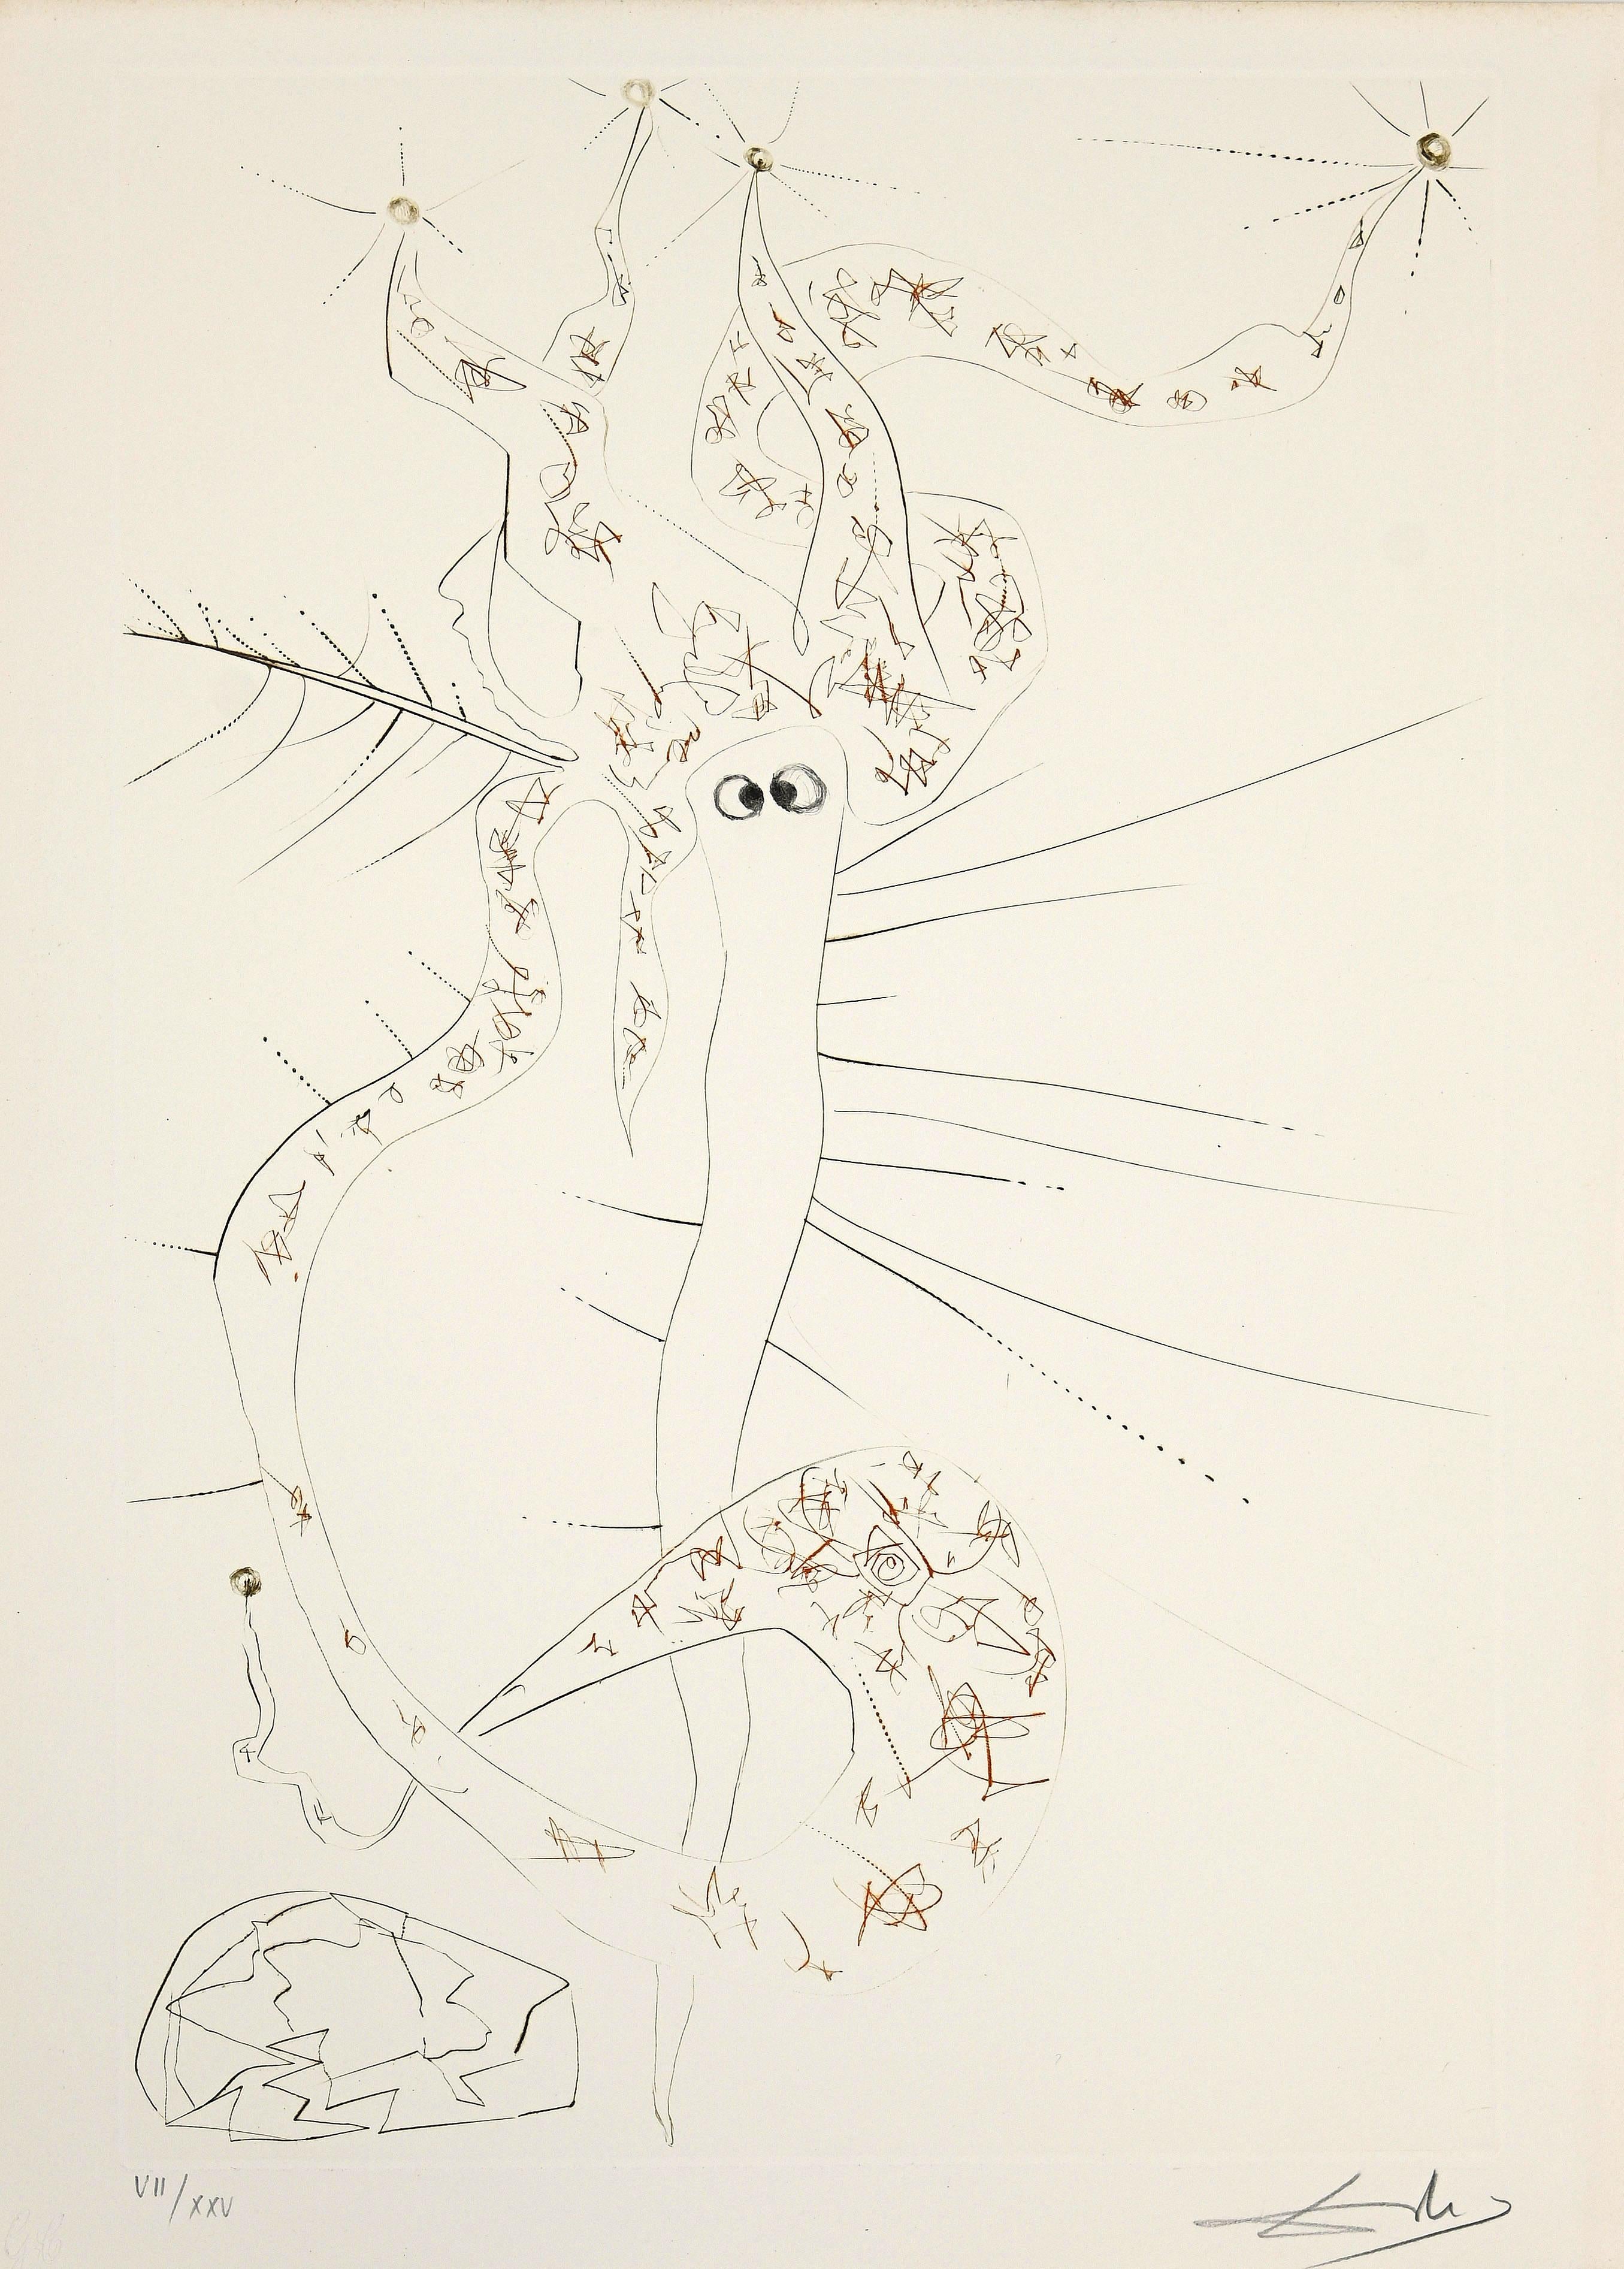 Salvador Dalí Figurative Print - Tristan le Fou (Tristan the Mad) - Etching and Drypoint by S. Dalì - 1969